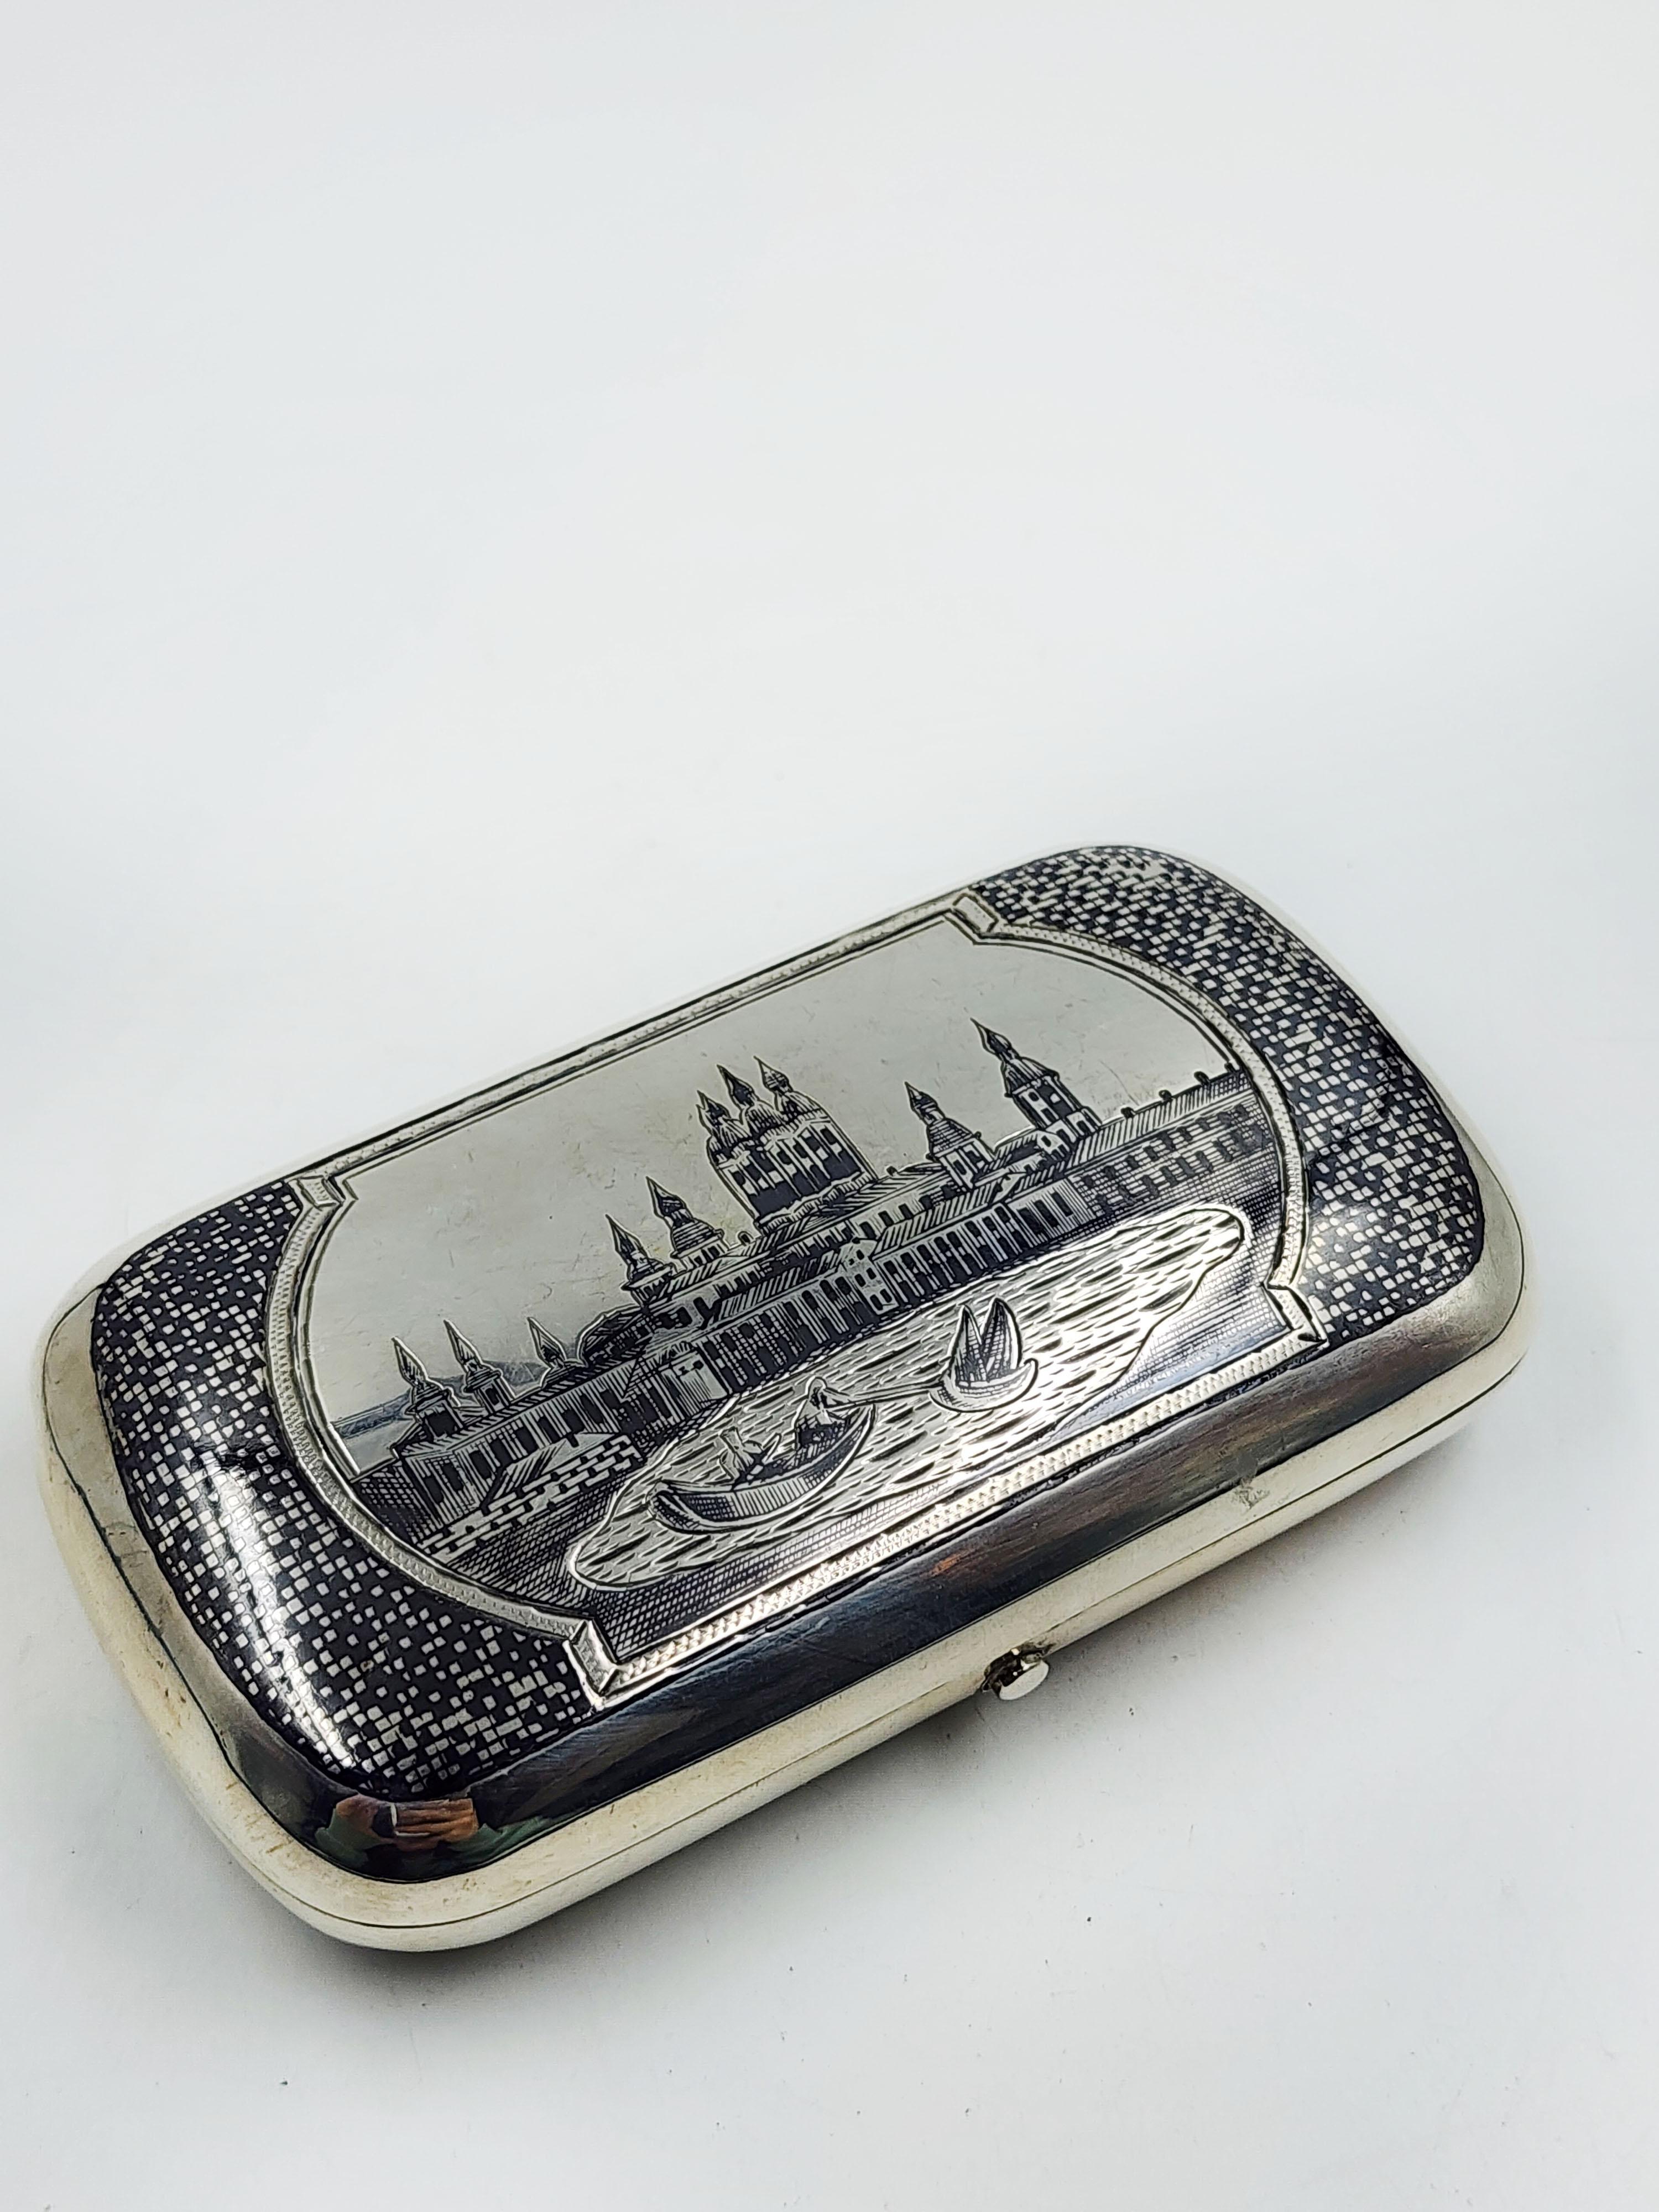 Russian Silver and Nickel Tobacco Box, 19th Century
Beautiful first-class Russian silver cigar holder, with a nickel-engraved design that represents a landscape with historical buildings, with a body of water with boatmen, on the edge of the lid it